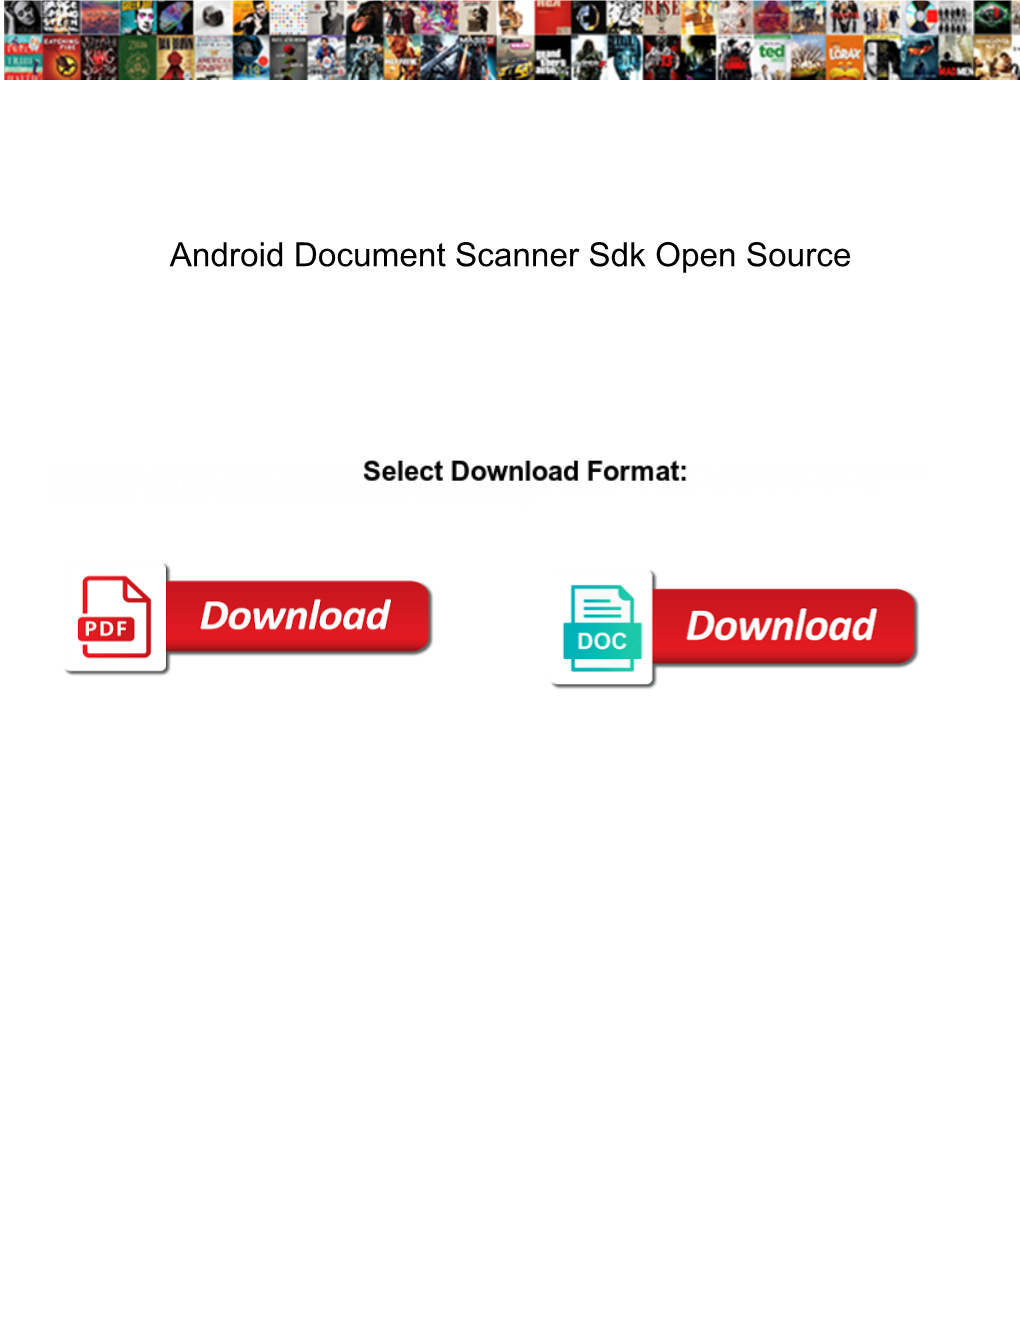 Android Document Scanner Sdk Open Source